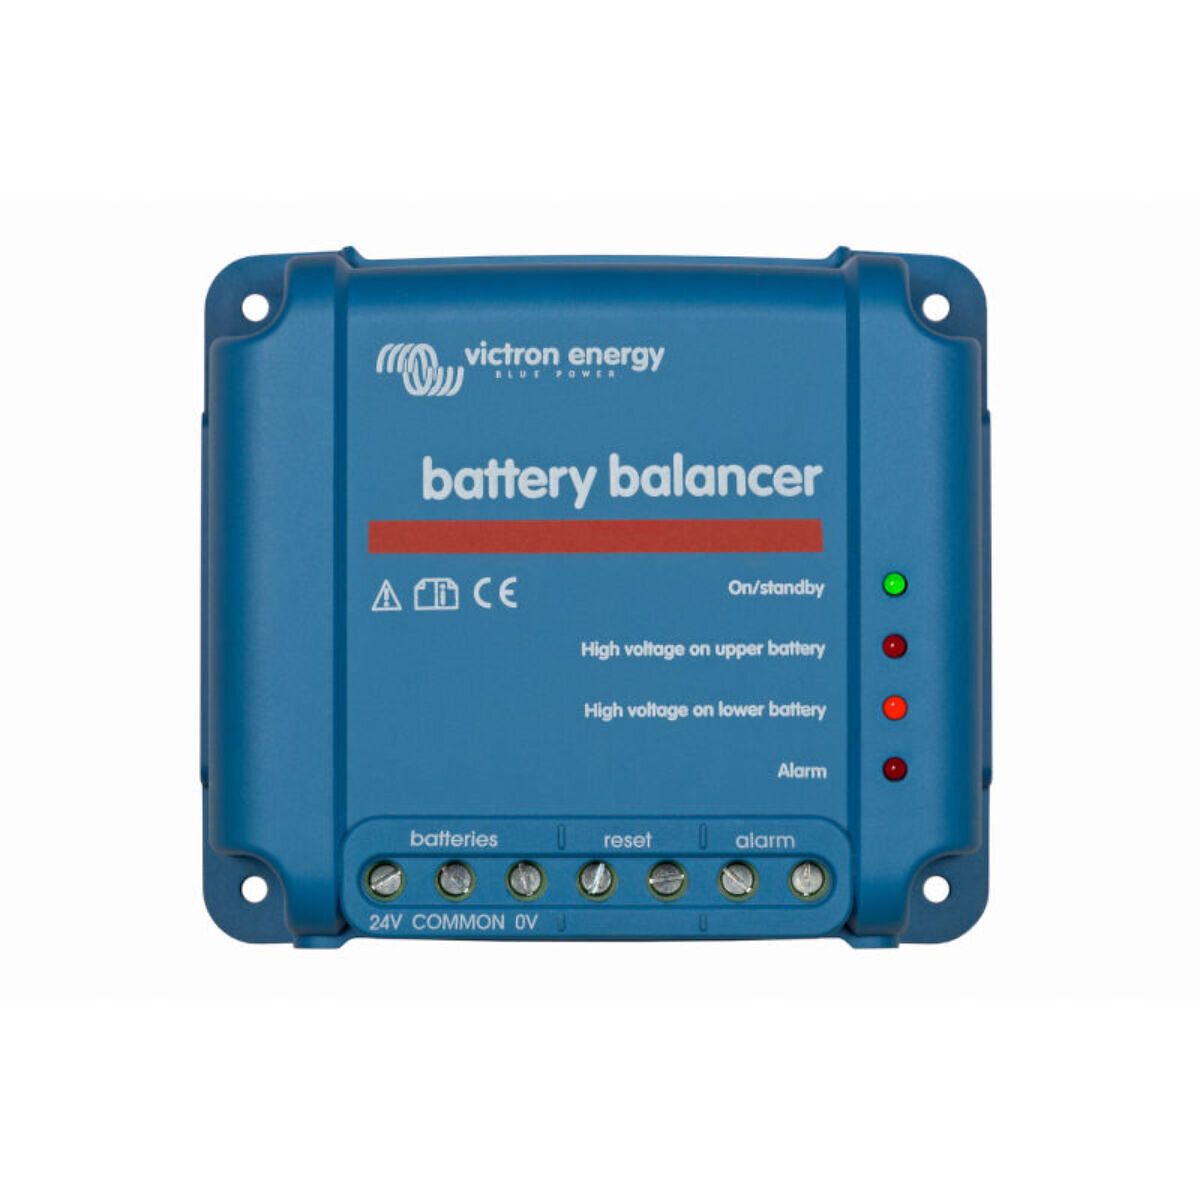 https://www.solacity.com/wp-content/uploads/2021/12/Victron-Battery-Balancer-1200x1200-cropped.jpg